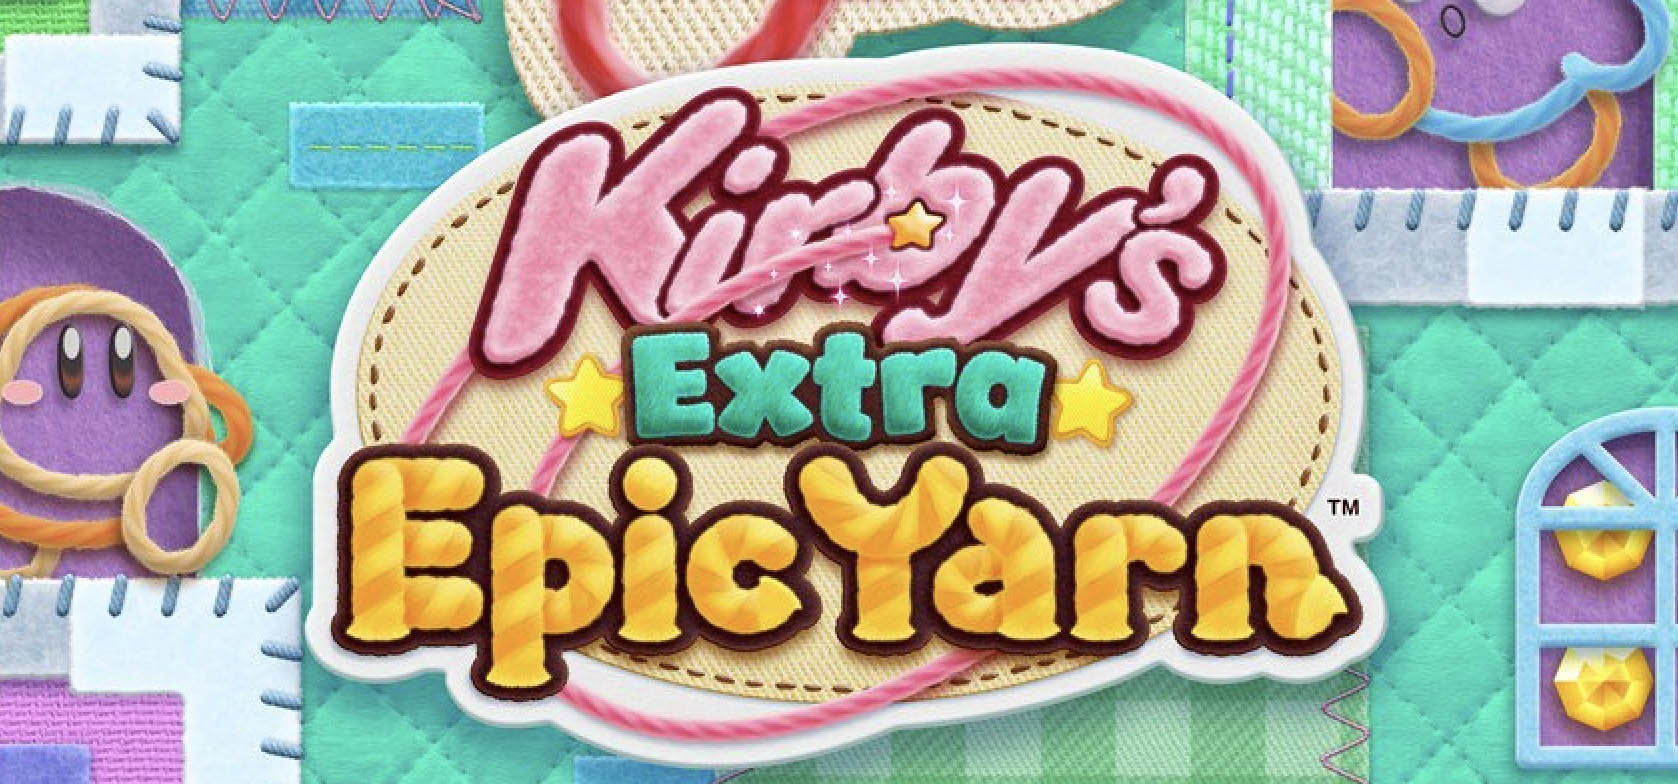 Kirby's Epic Yarn - 3DS and 2DS, Wii and Wii U - Kids Age Ratings